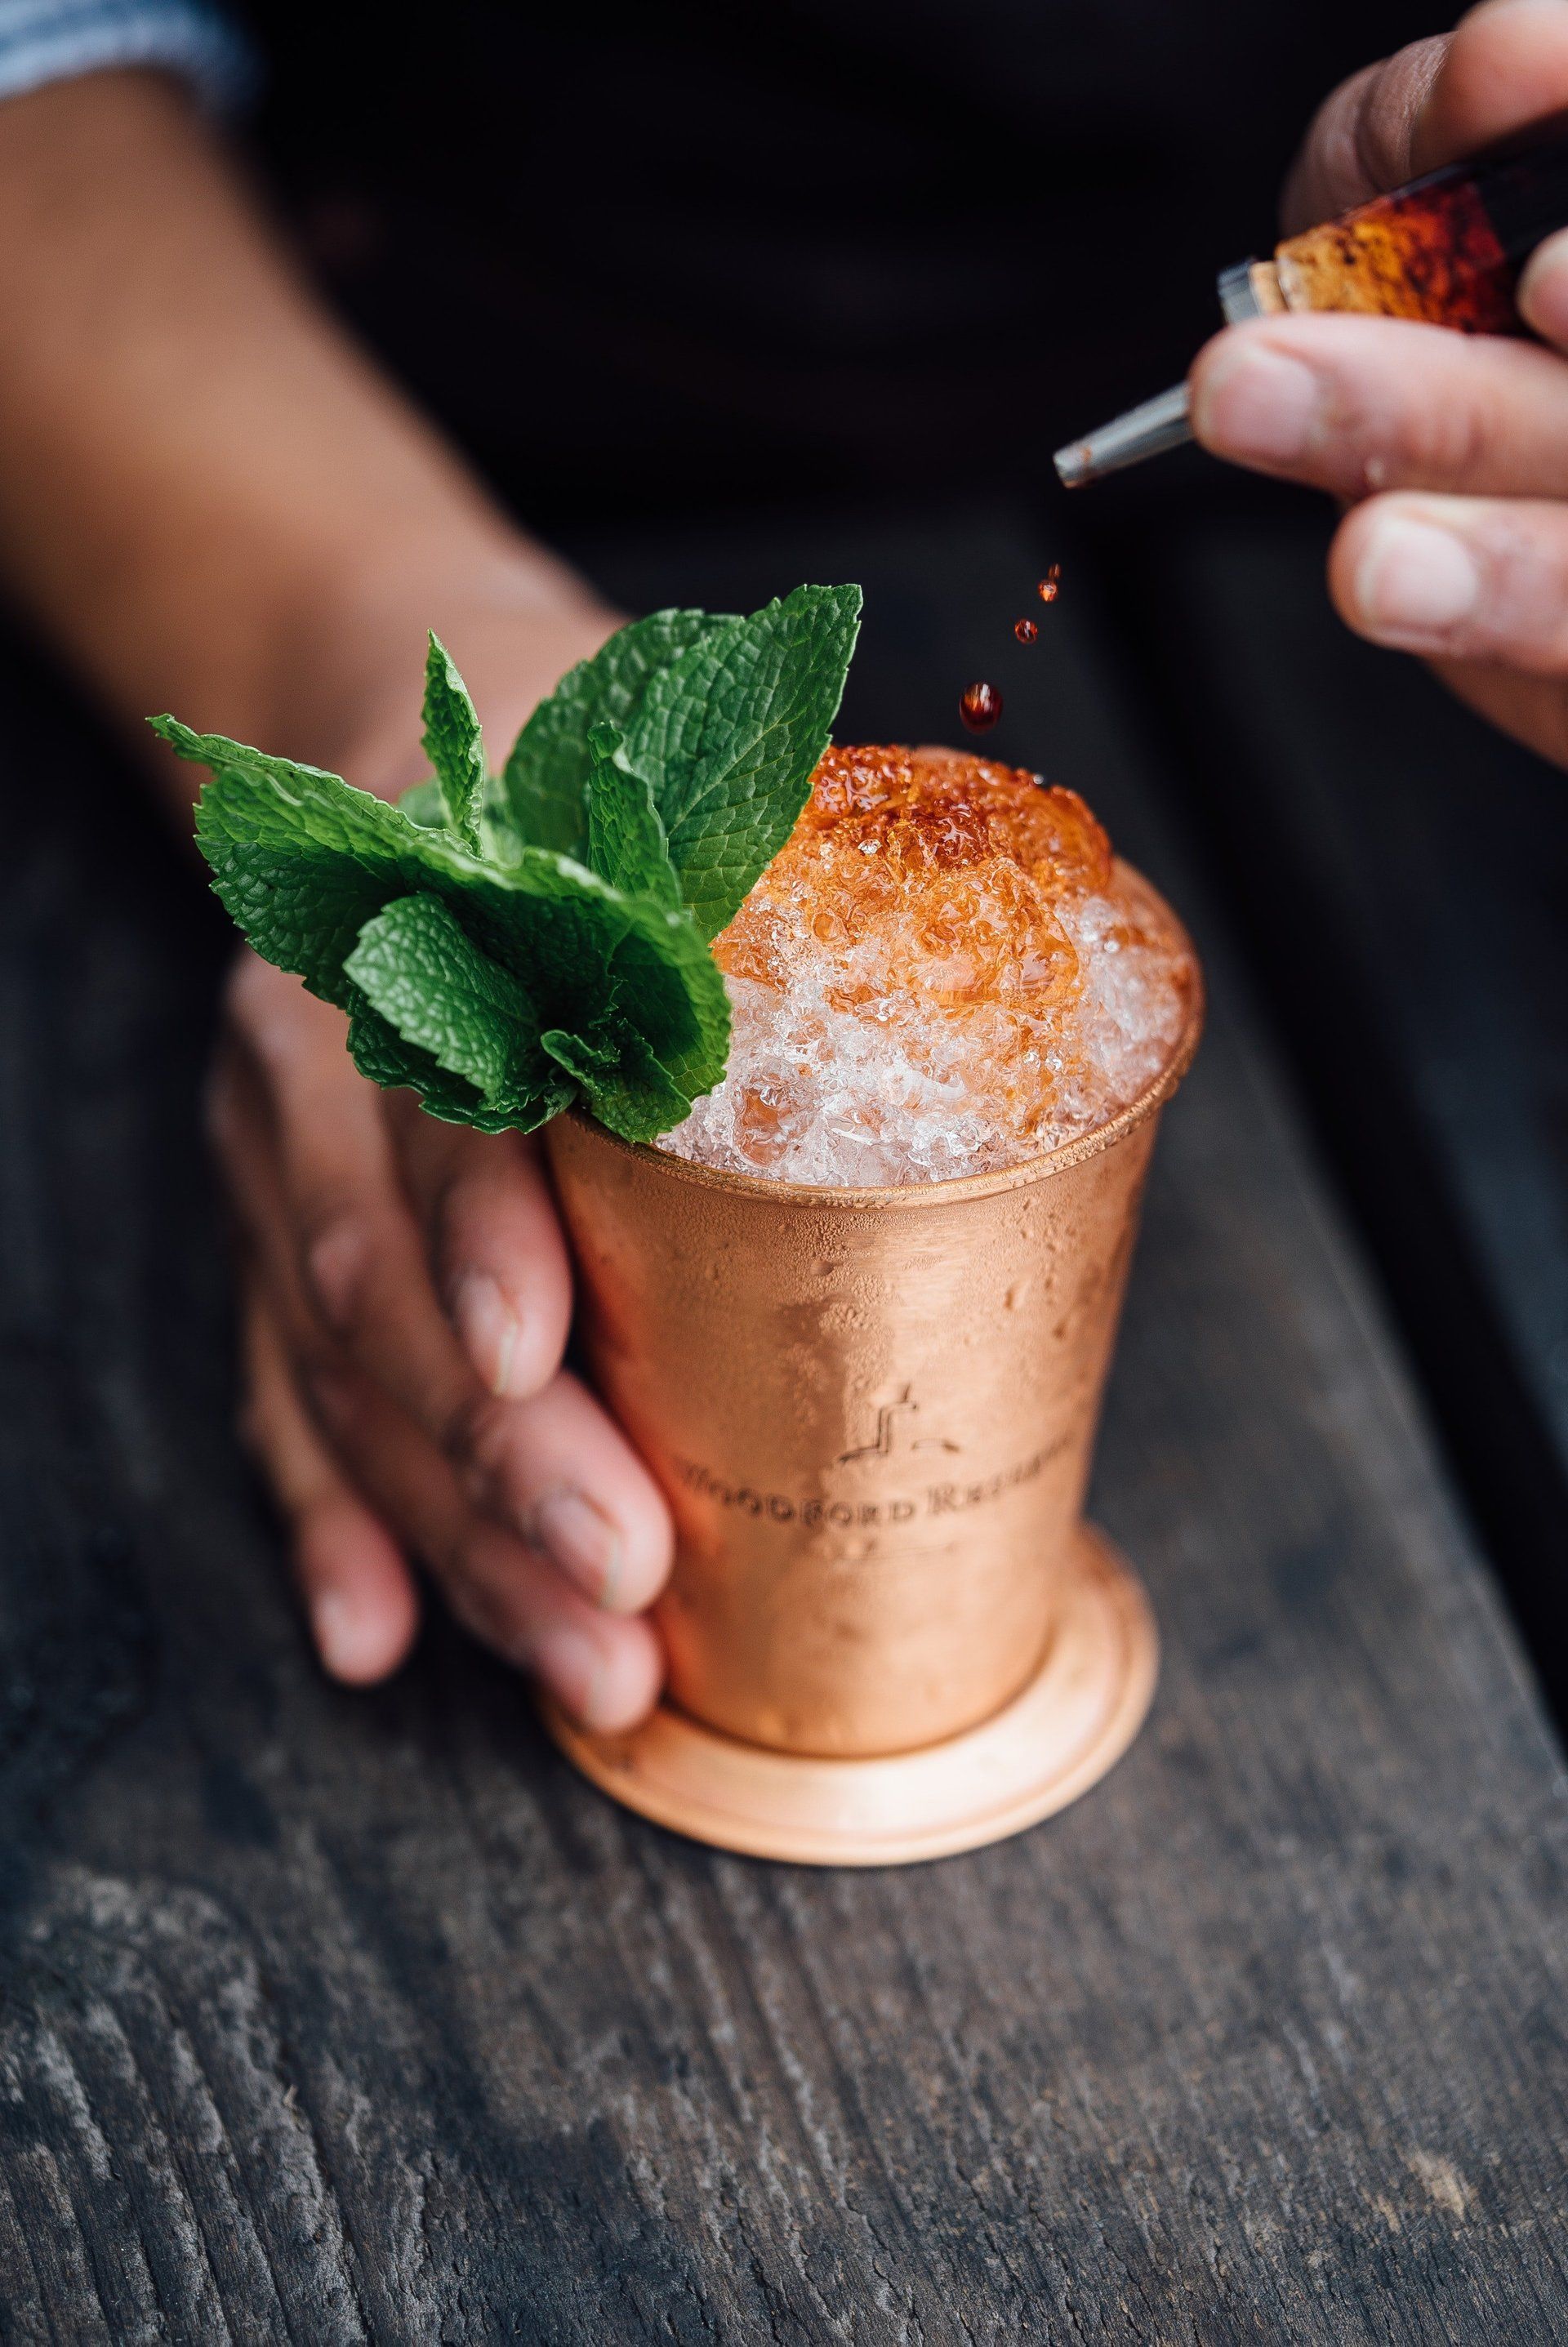 Looking for a Mint Julep?